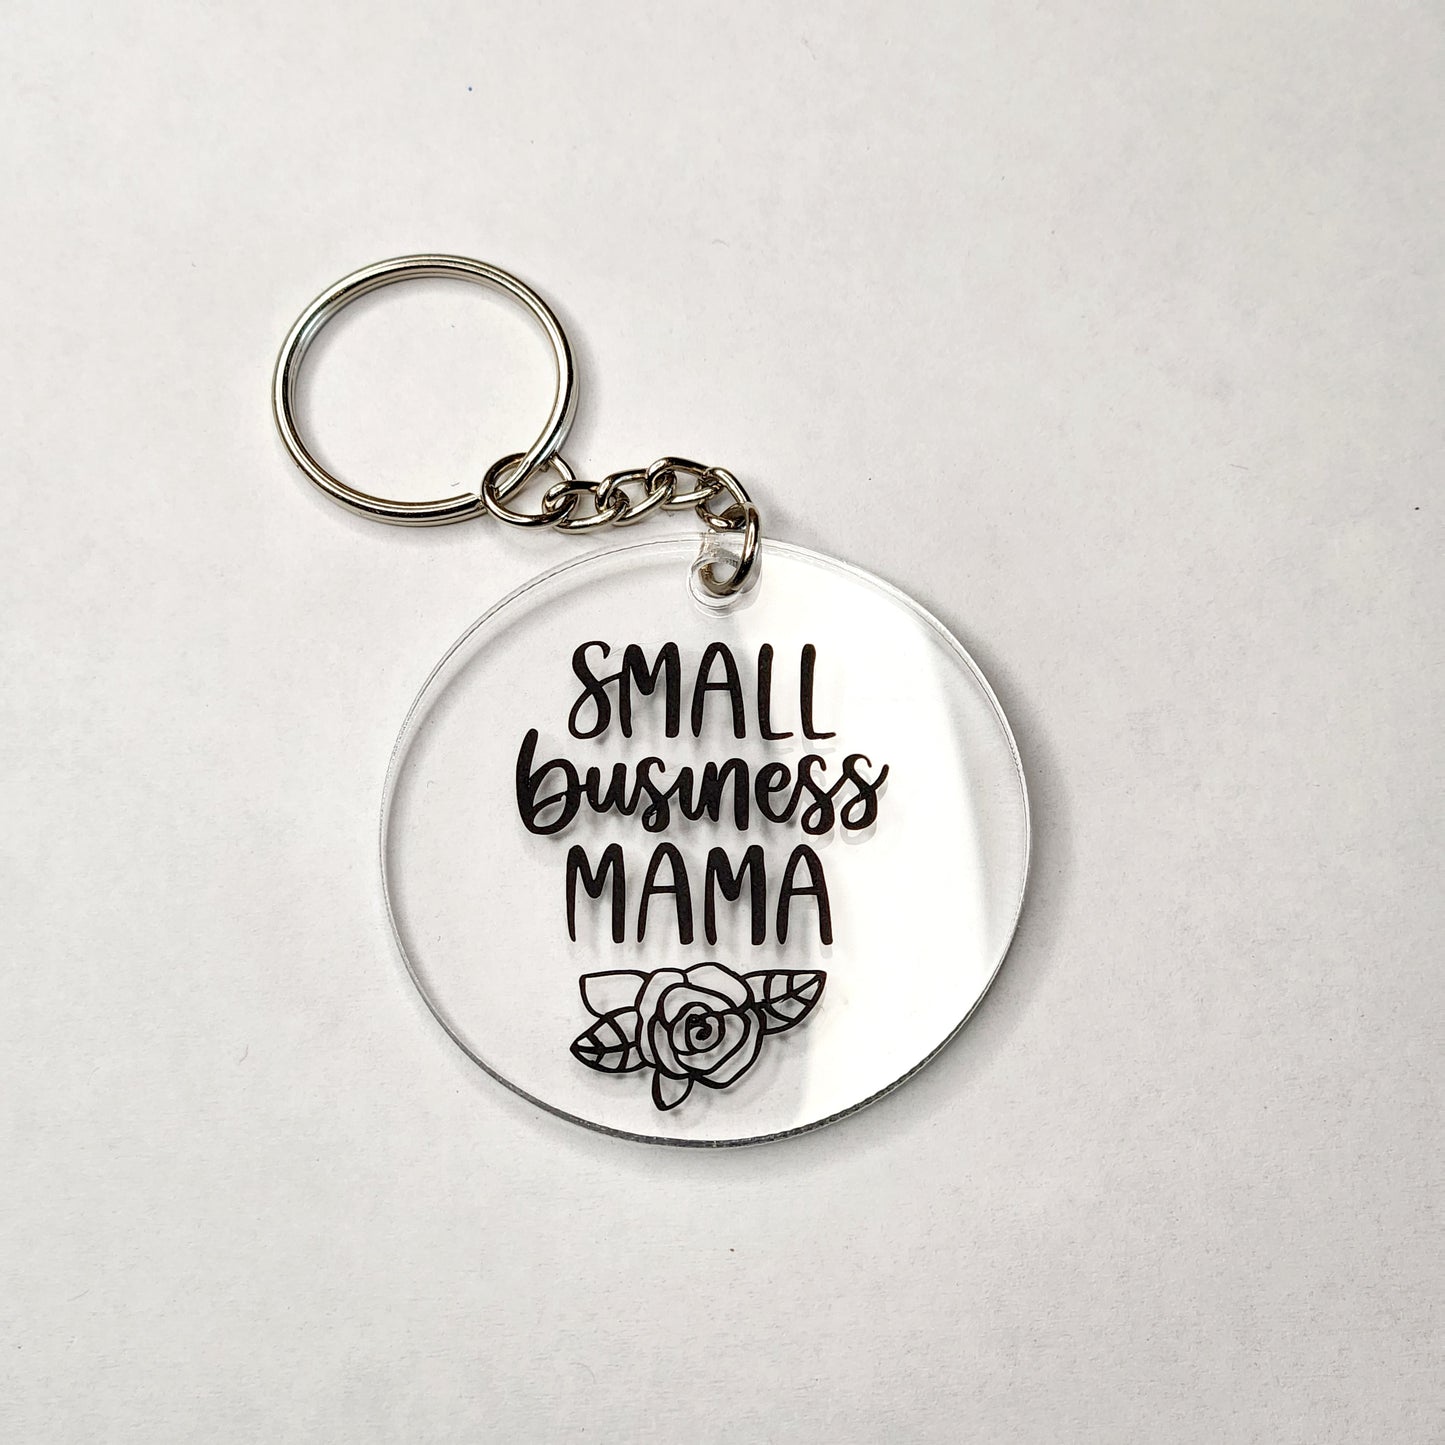 Small Business Keychain - Variety